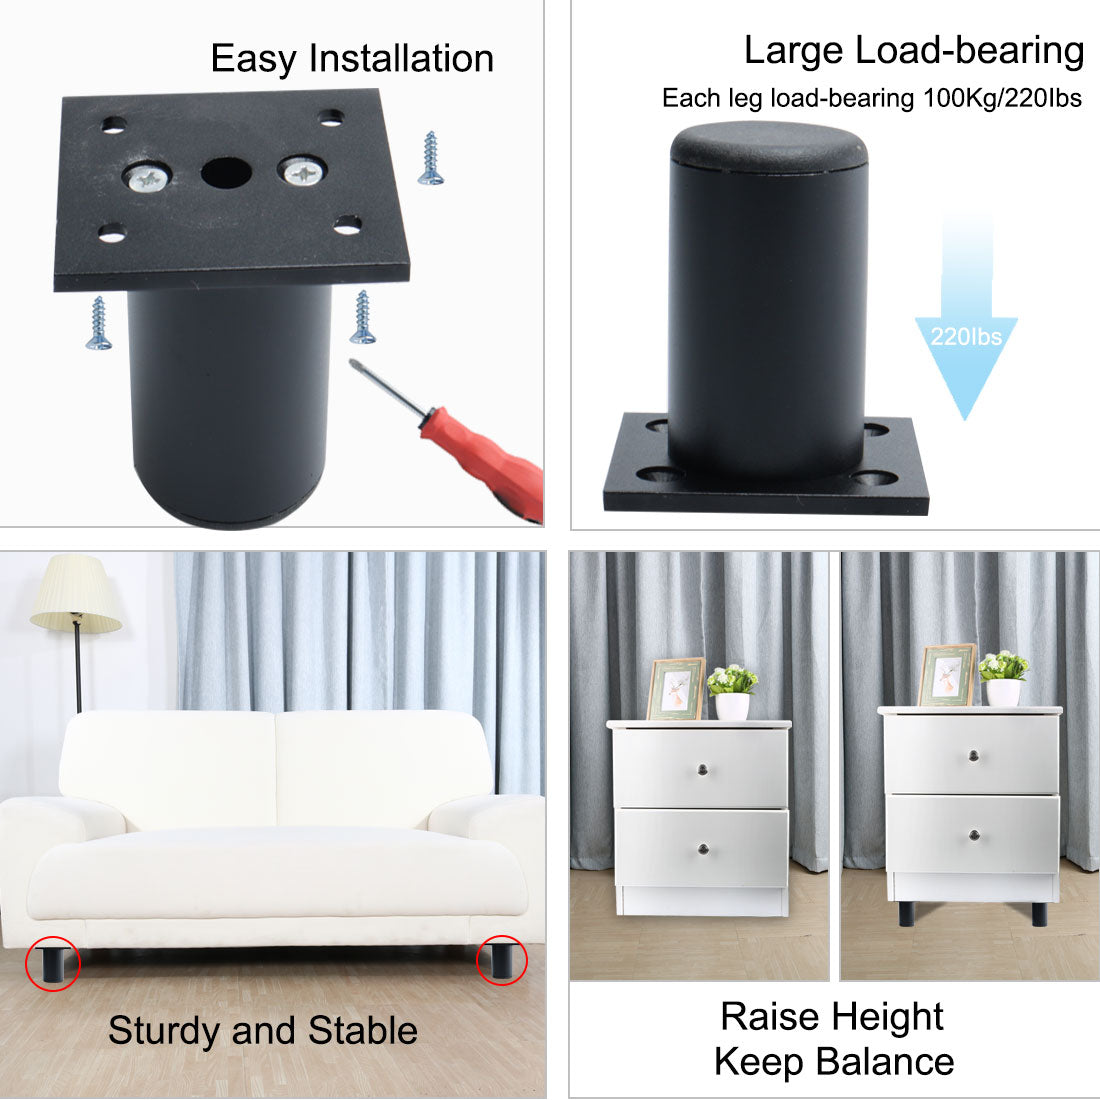 uxcell Uxcell Round Black Furniture Legs Aluminium Alloy Sofa Feet Replacement Height Adjuster